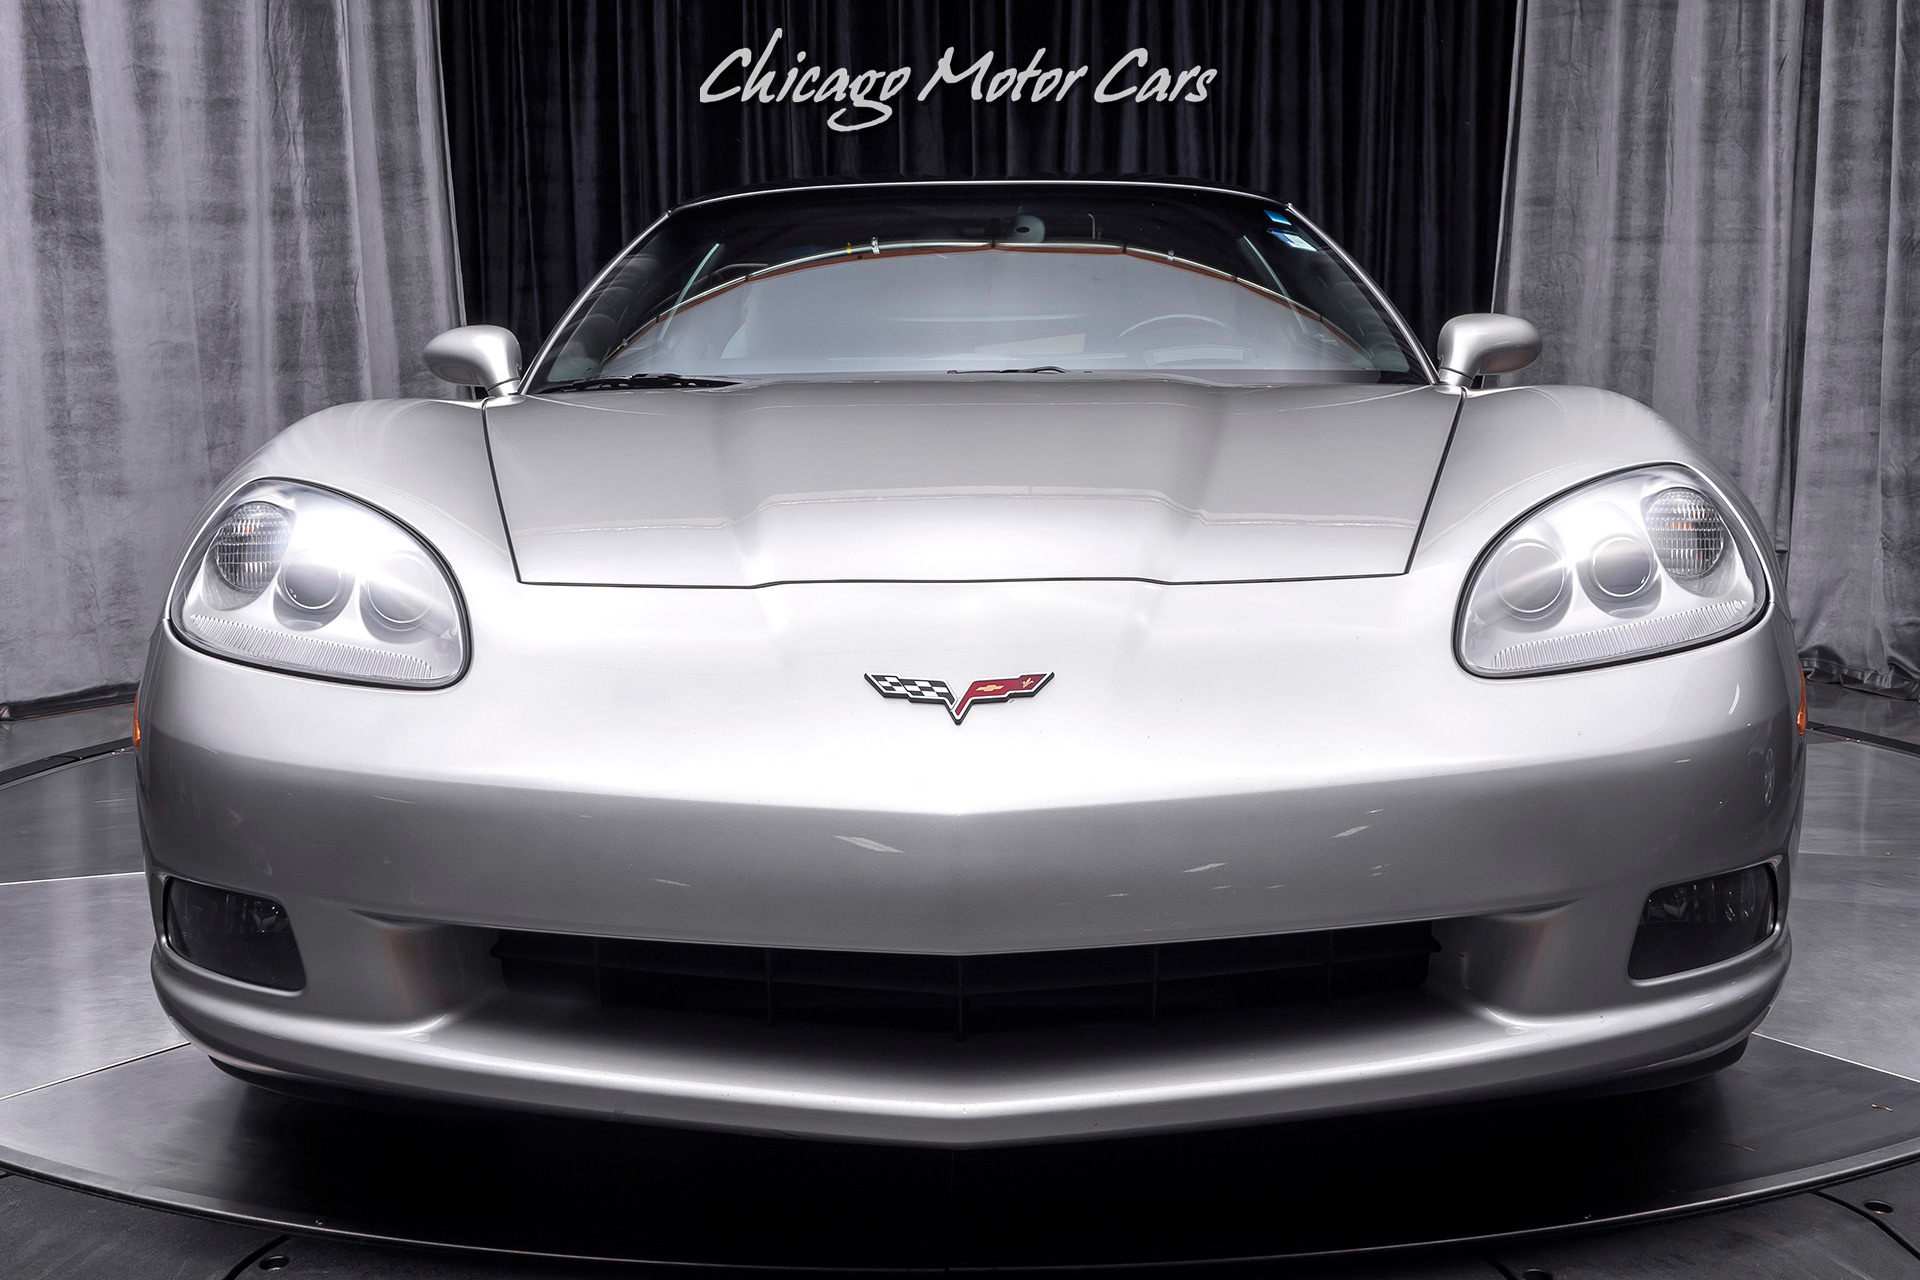 Used-2005-Chevrolet-Corvette-Coupe-Well-Maintained-APPLE-CAR-PLAY-Removable-Roof